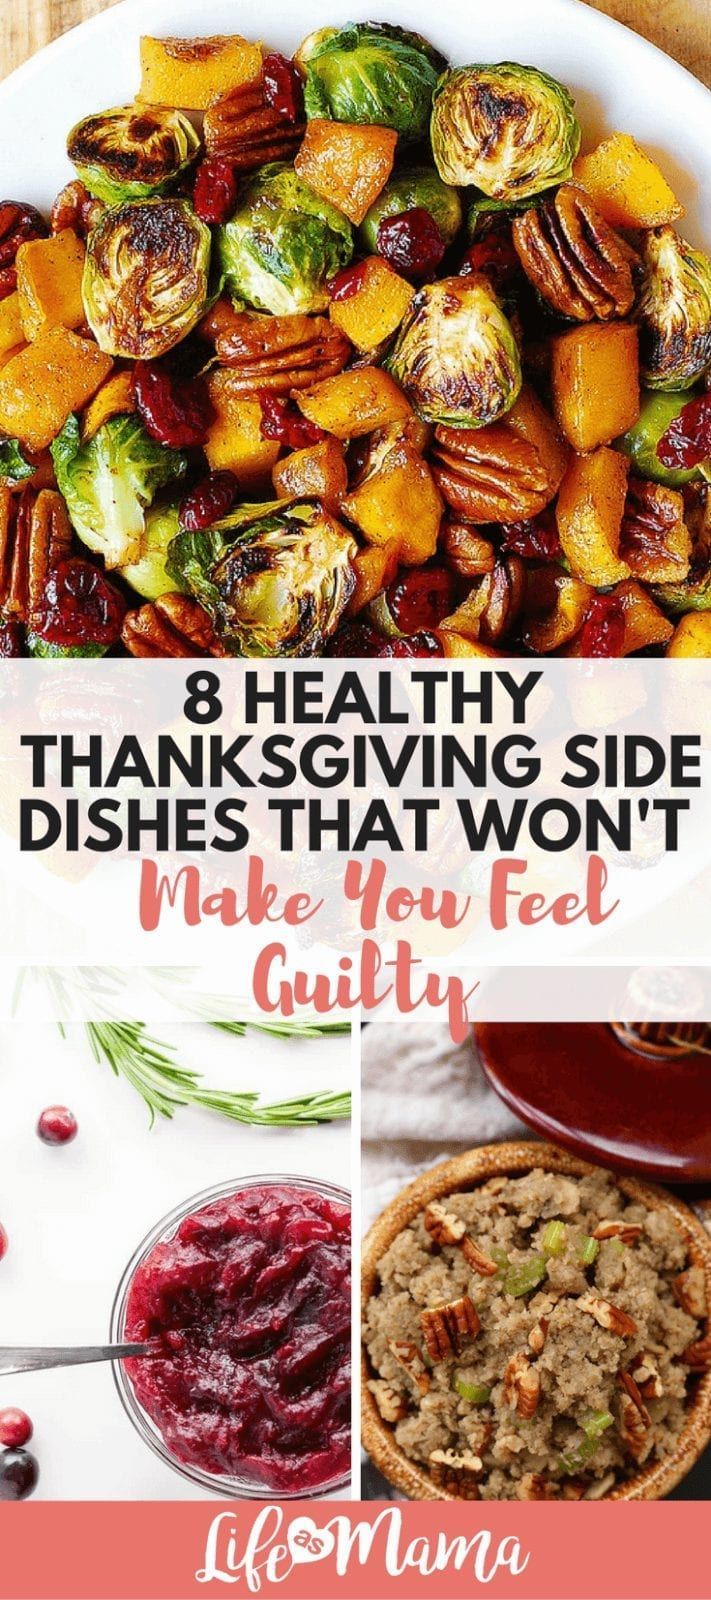 8 Healthy Thanksgiving Side Dishes That Won't Make You Feel Guilty -   19 thanksgiving sides healthy crockpot ideas